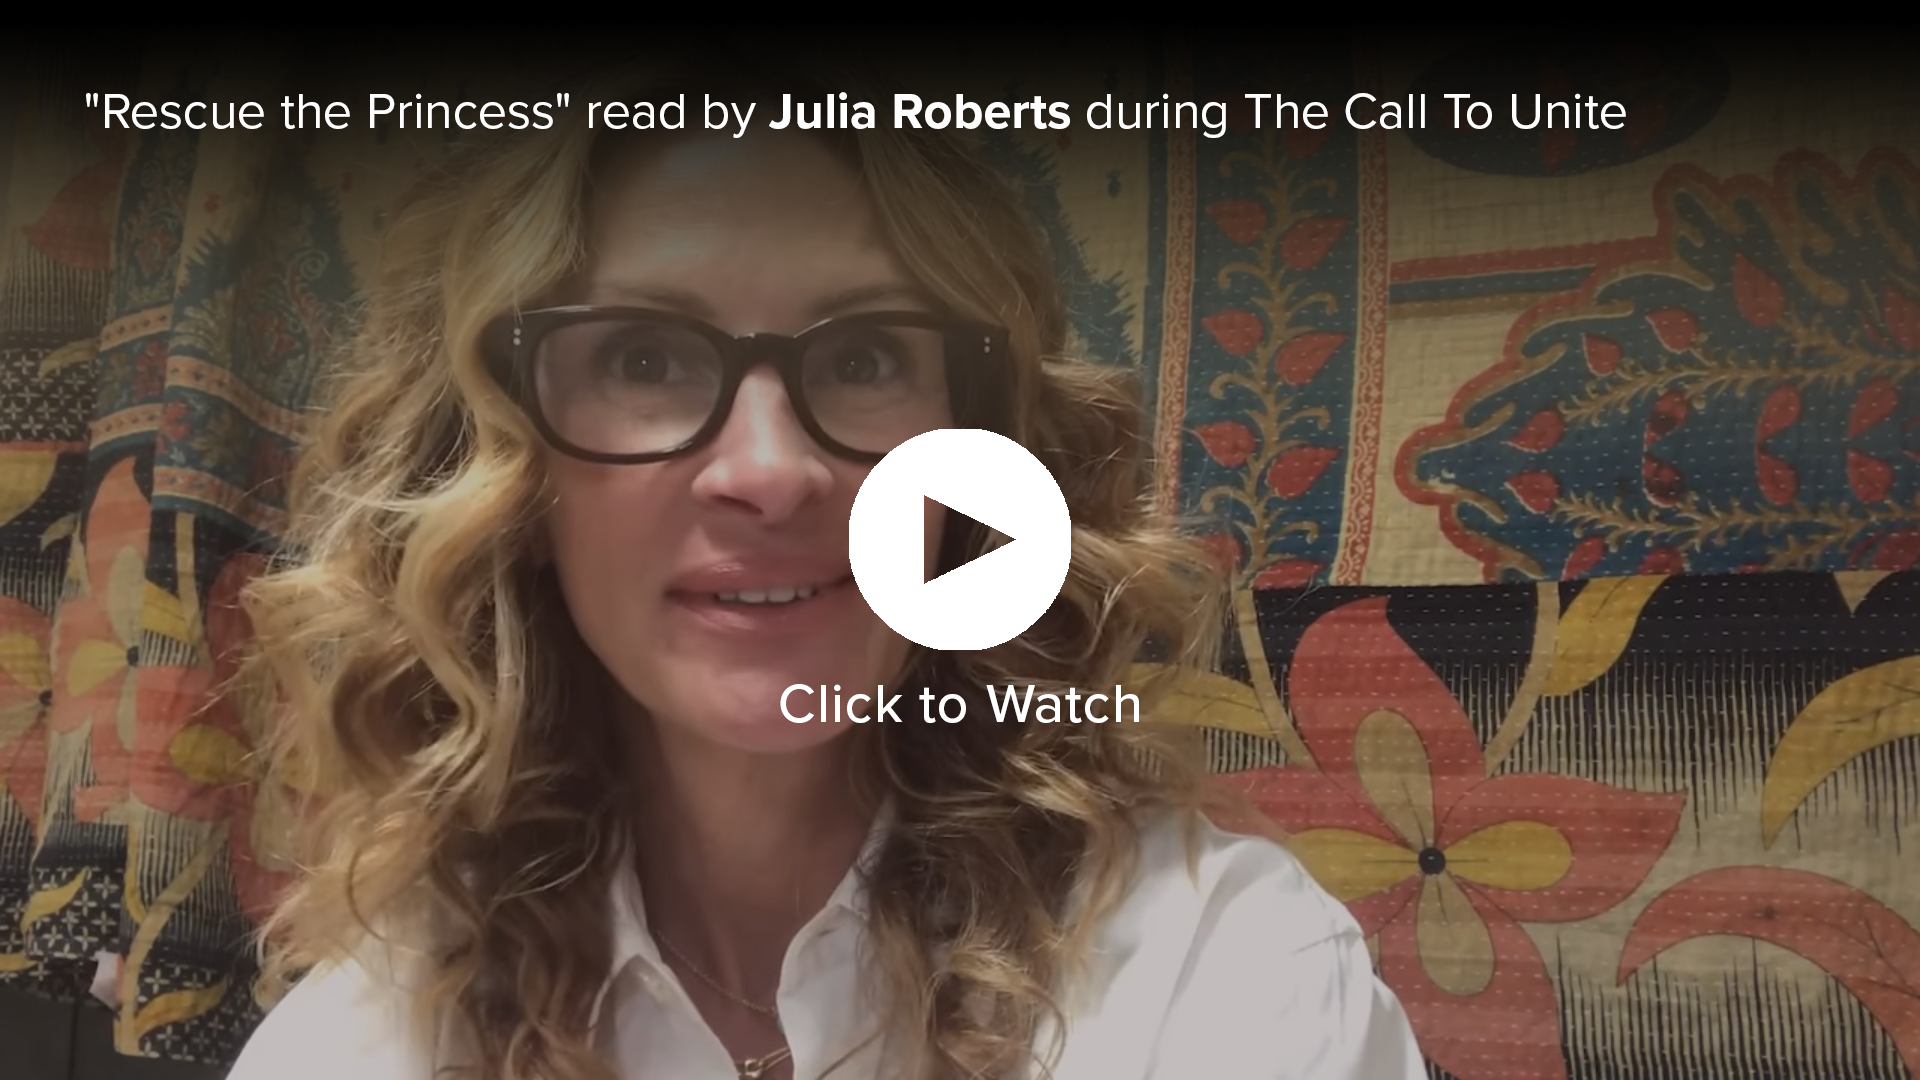 Julia Roberts reads "Rescue the Princess" during The Call to Unite [LINK]